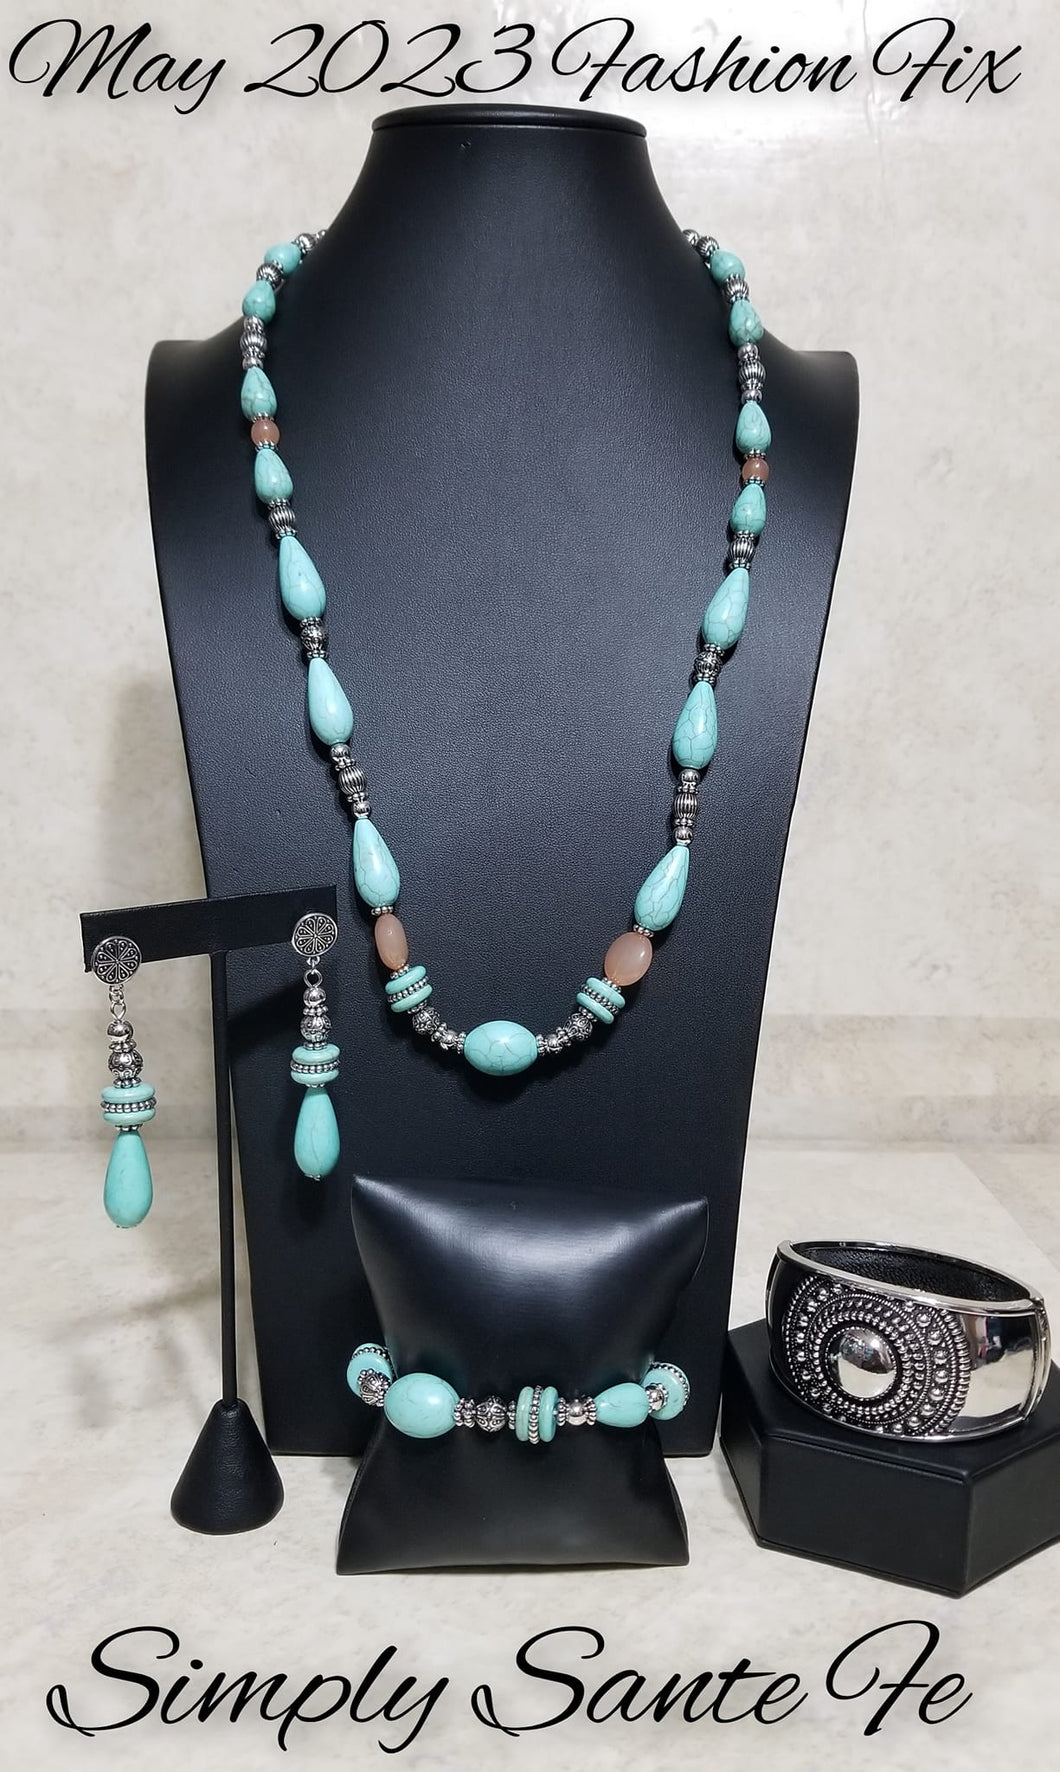 Simply Santa Fe Fashion Fix by Paparazzi Accessories (May 2023)